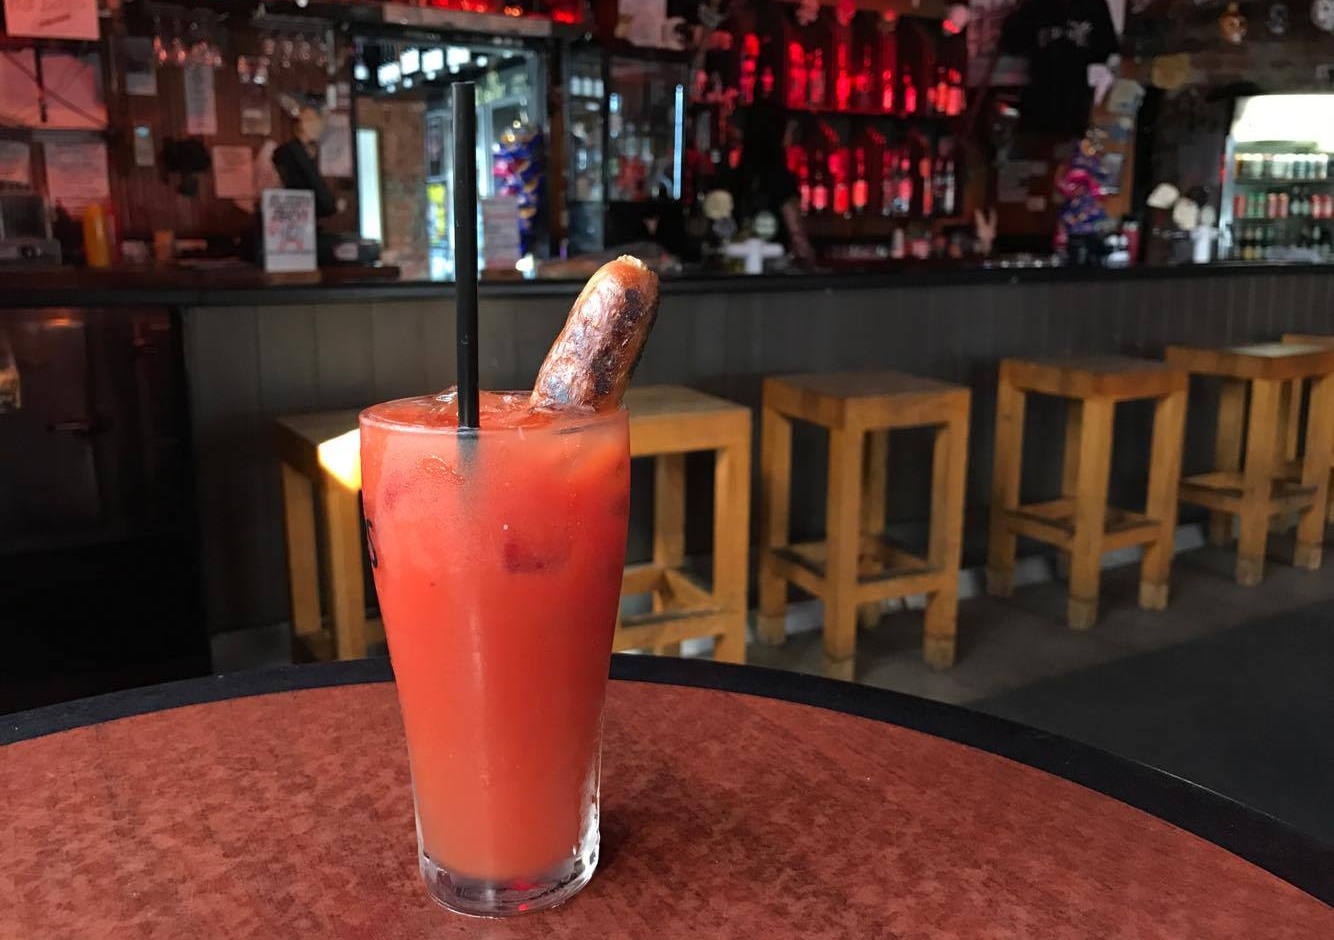 Bunnings Snag cocktails are now a thing and you can get them at this